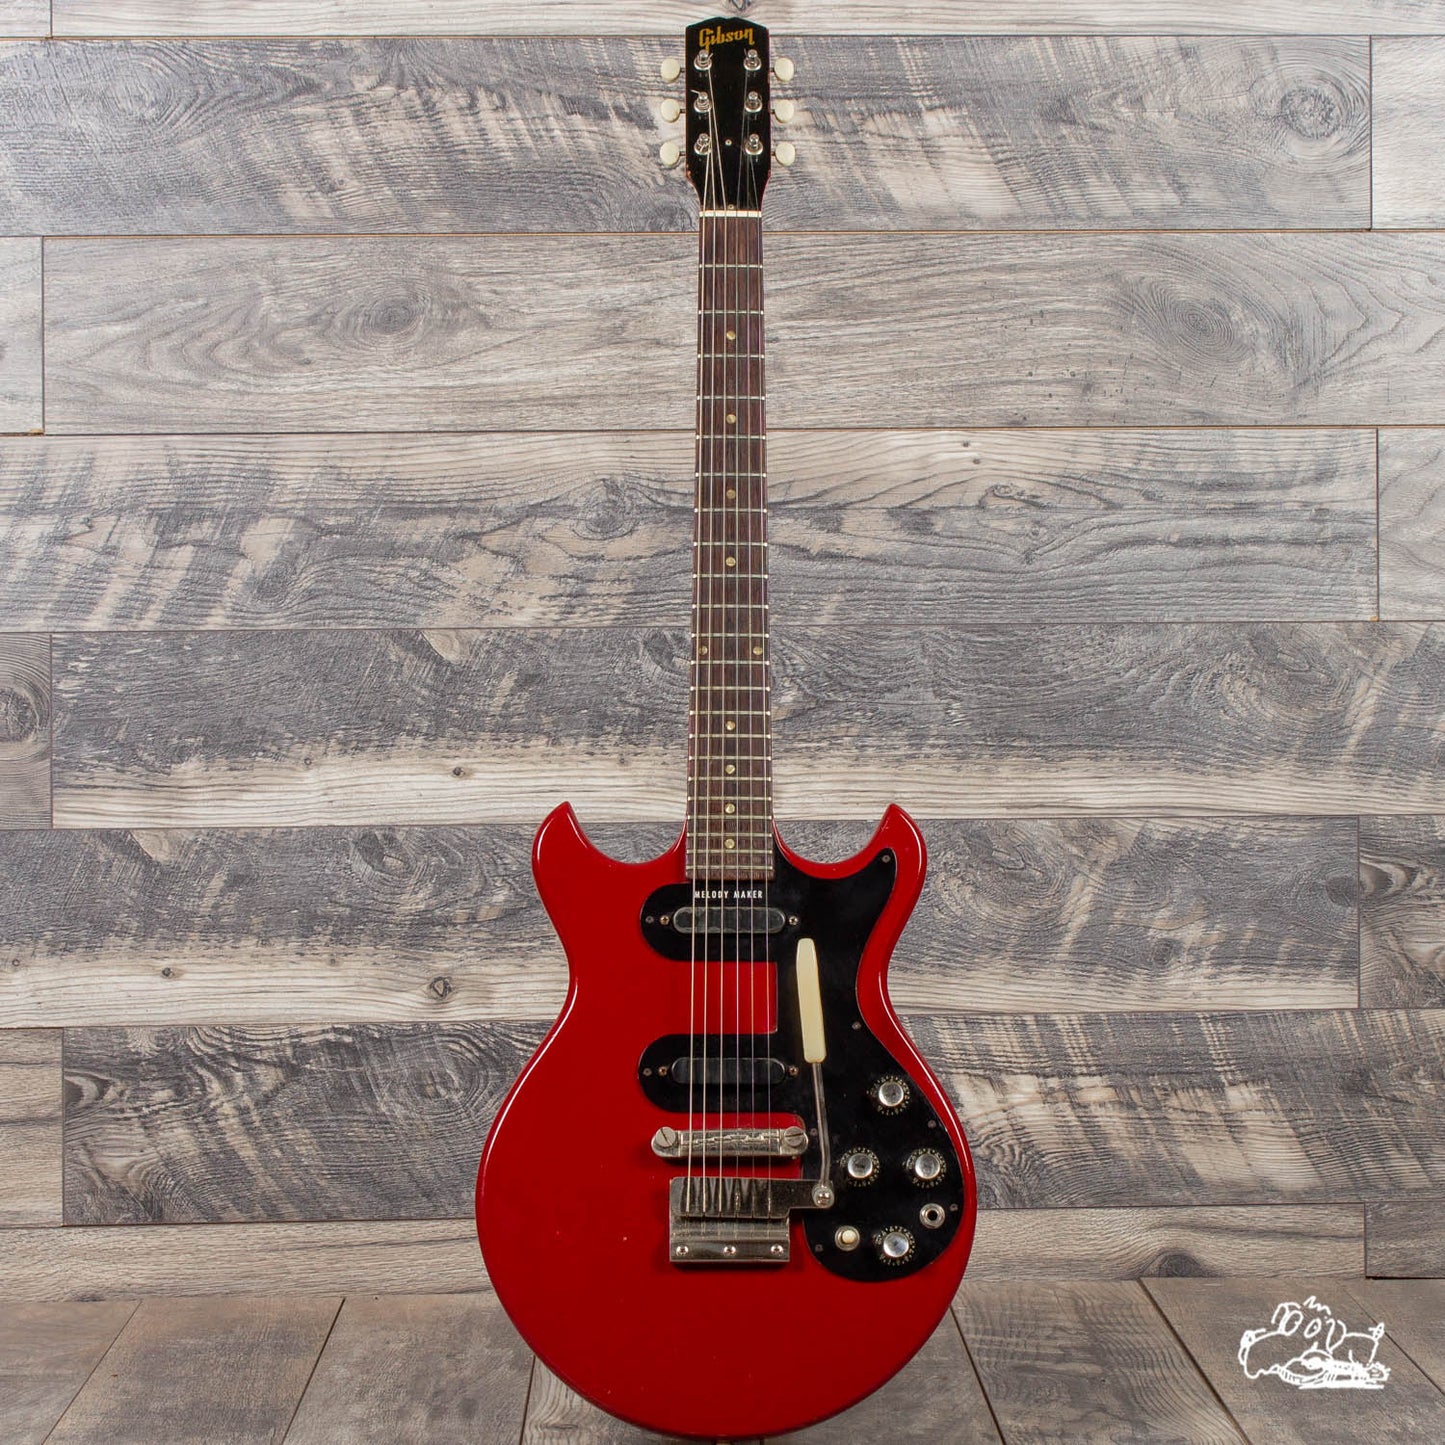 1965 Gibson Melody Maker - Cardinal Red